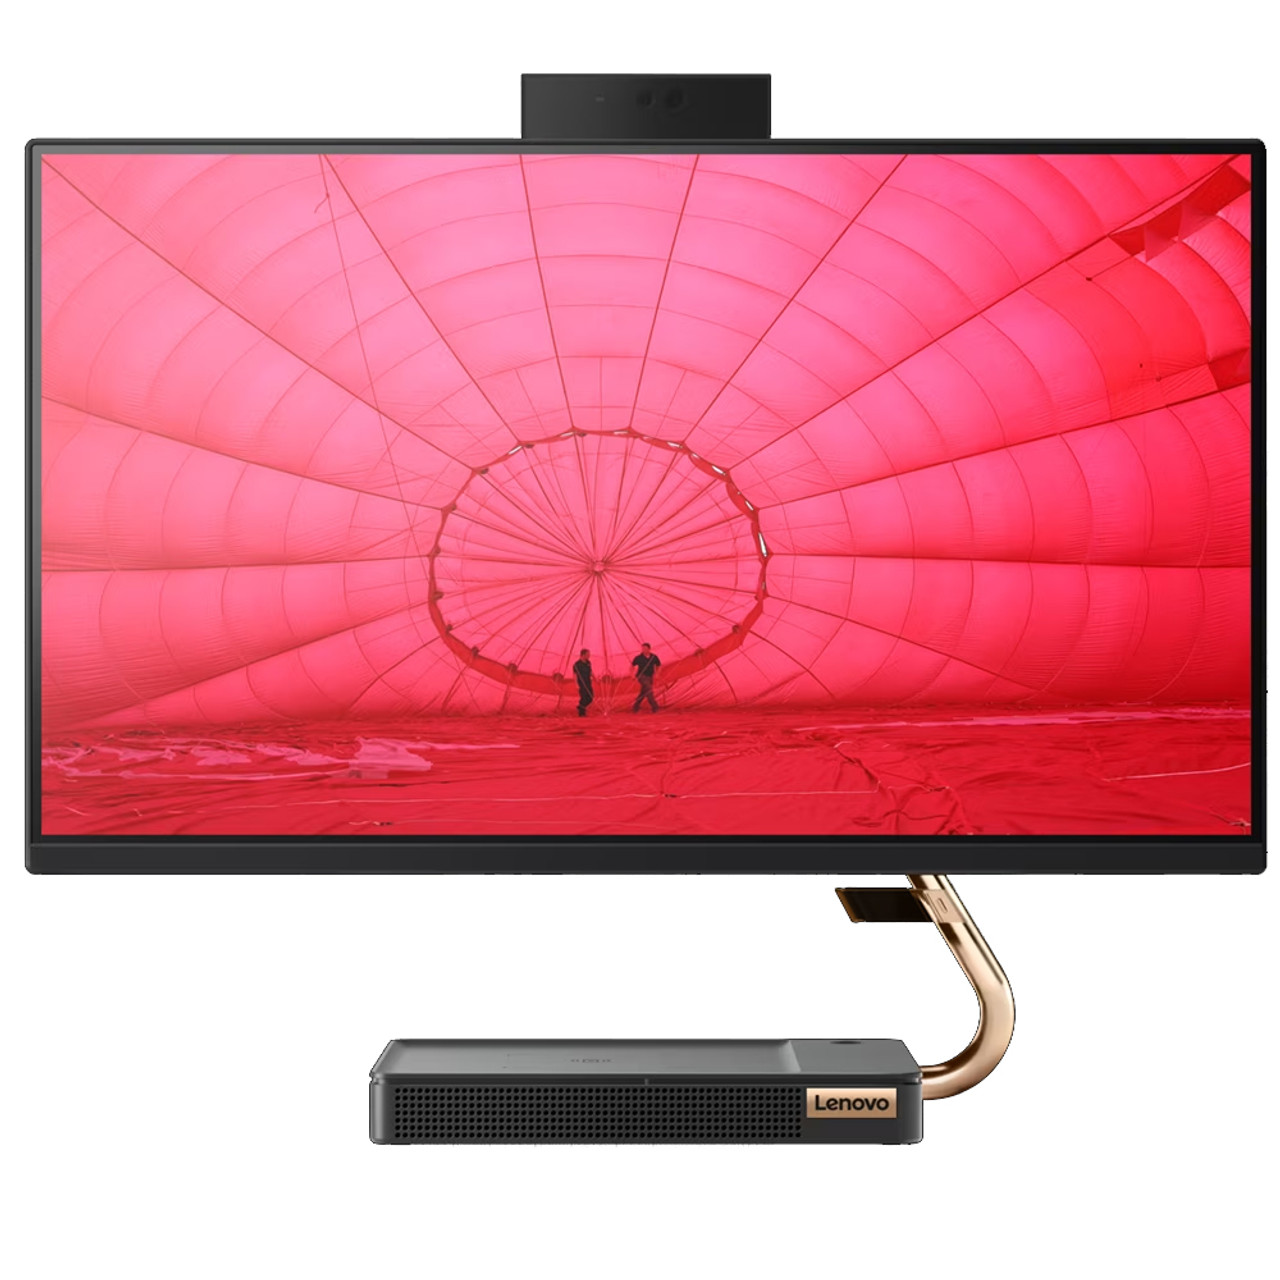 Lenovo Ideacentre AIO 5 23.8" Touch All In One i7-10700T 16GB 512GB SSD W10H | F0FB001GUS | Manufacturer Refurbished